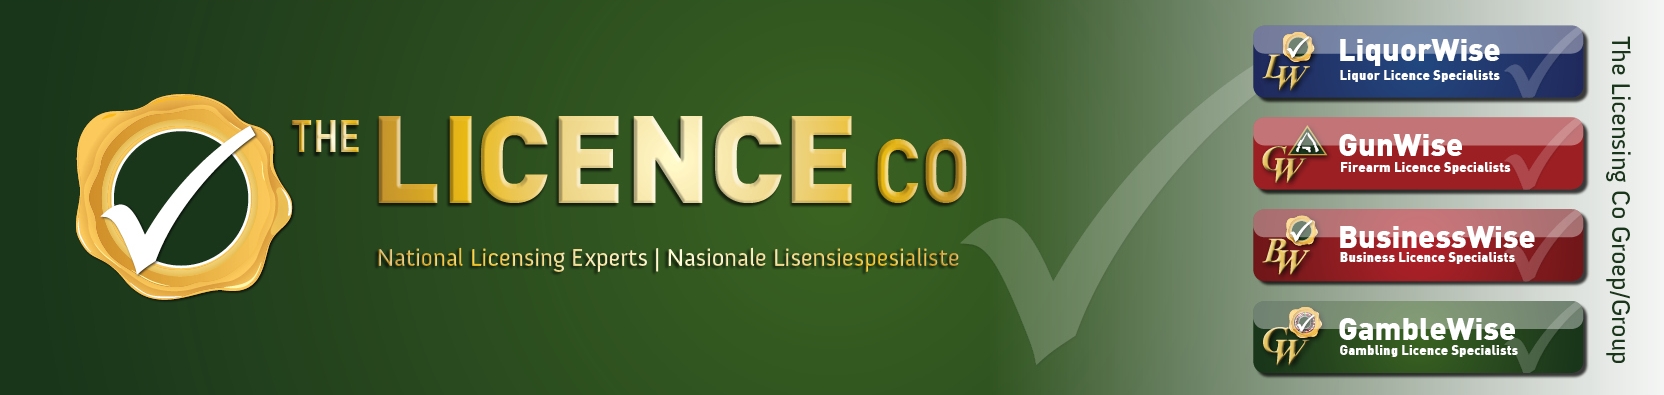 The Licence Co